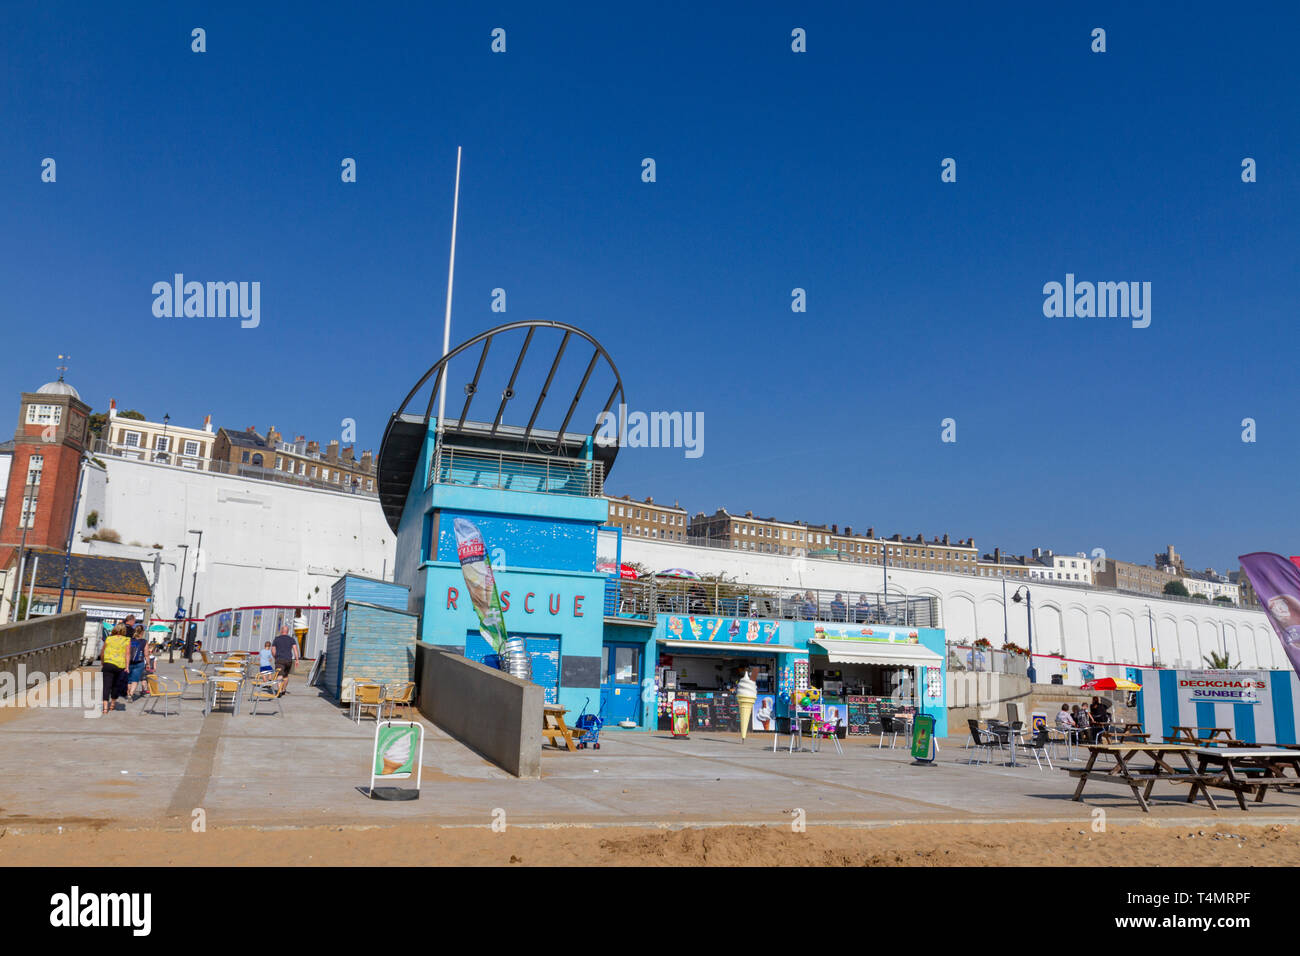 The lifeguard tower and rescue centre close to the beach in Ramsgate, Kent, UK. Stock Photo